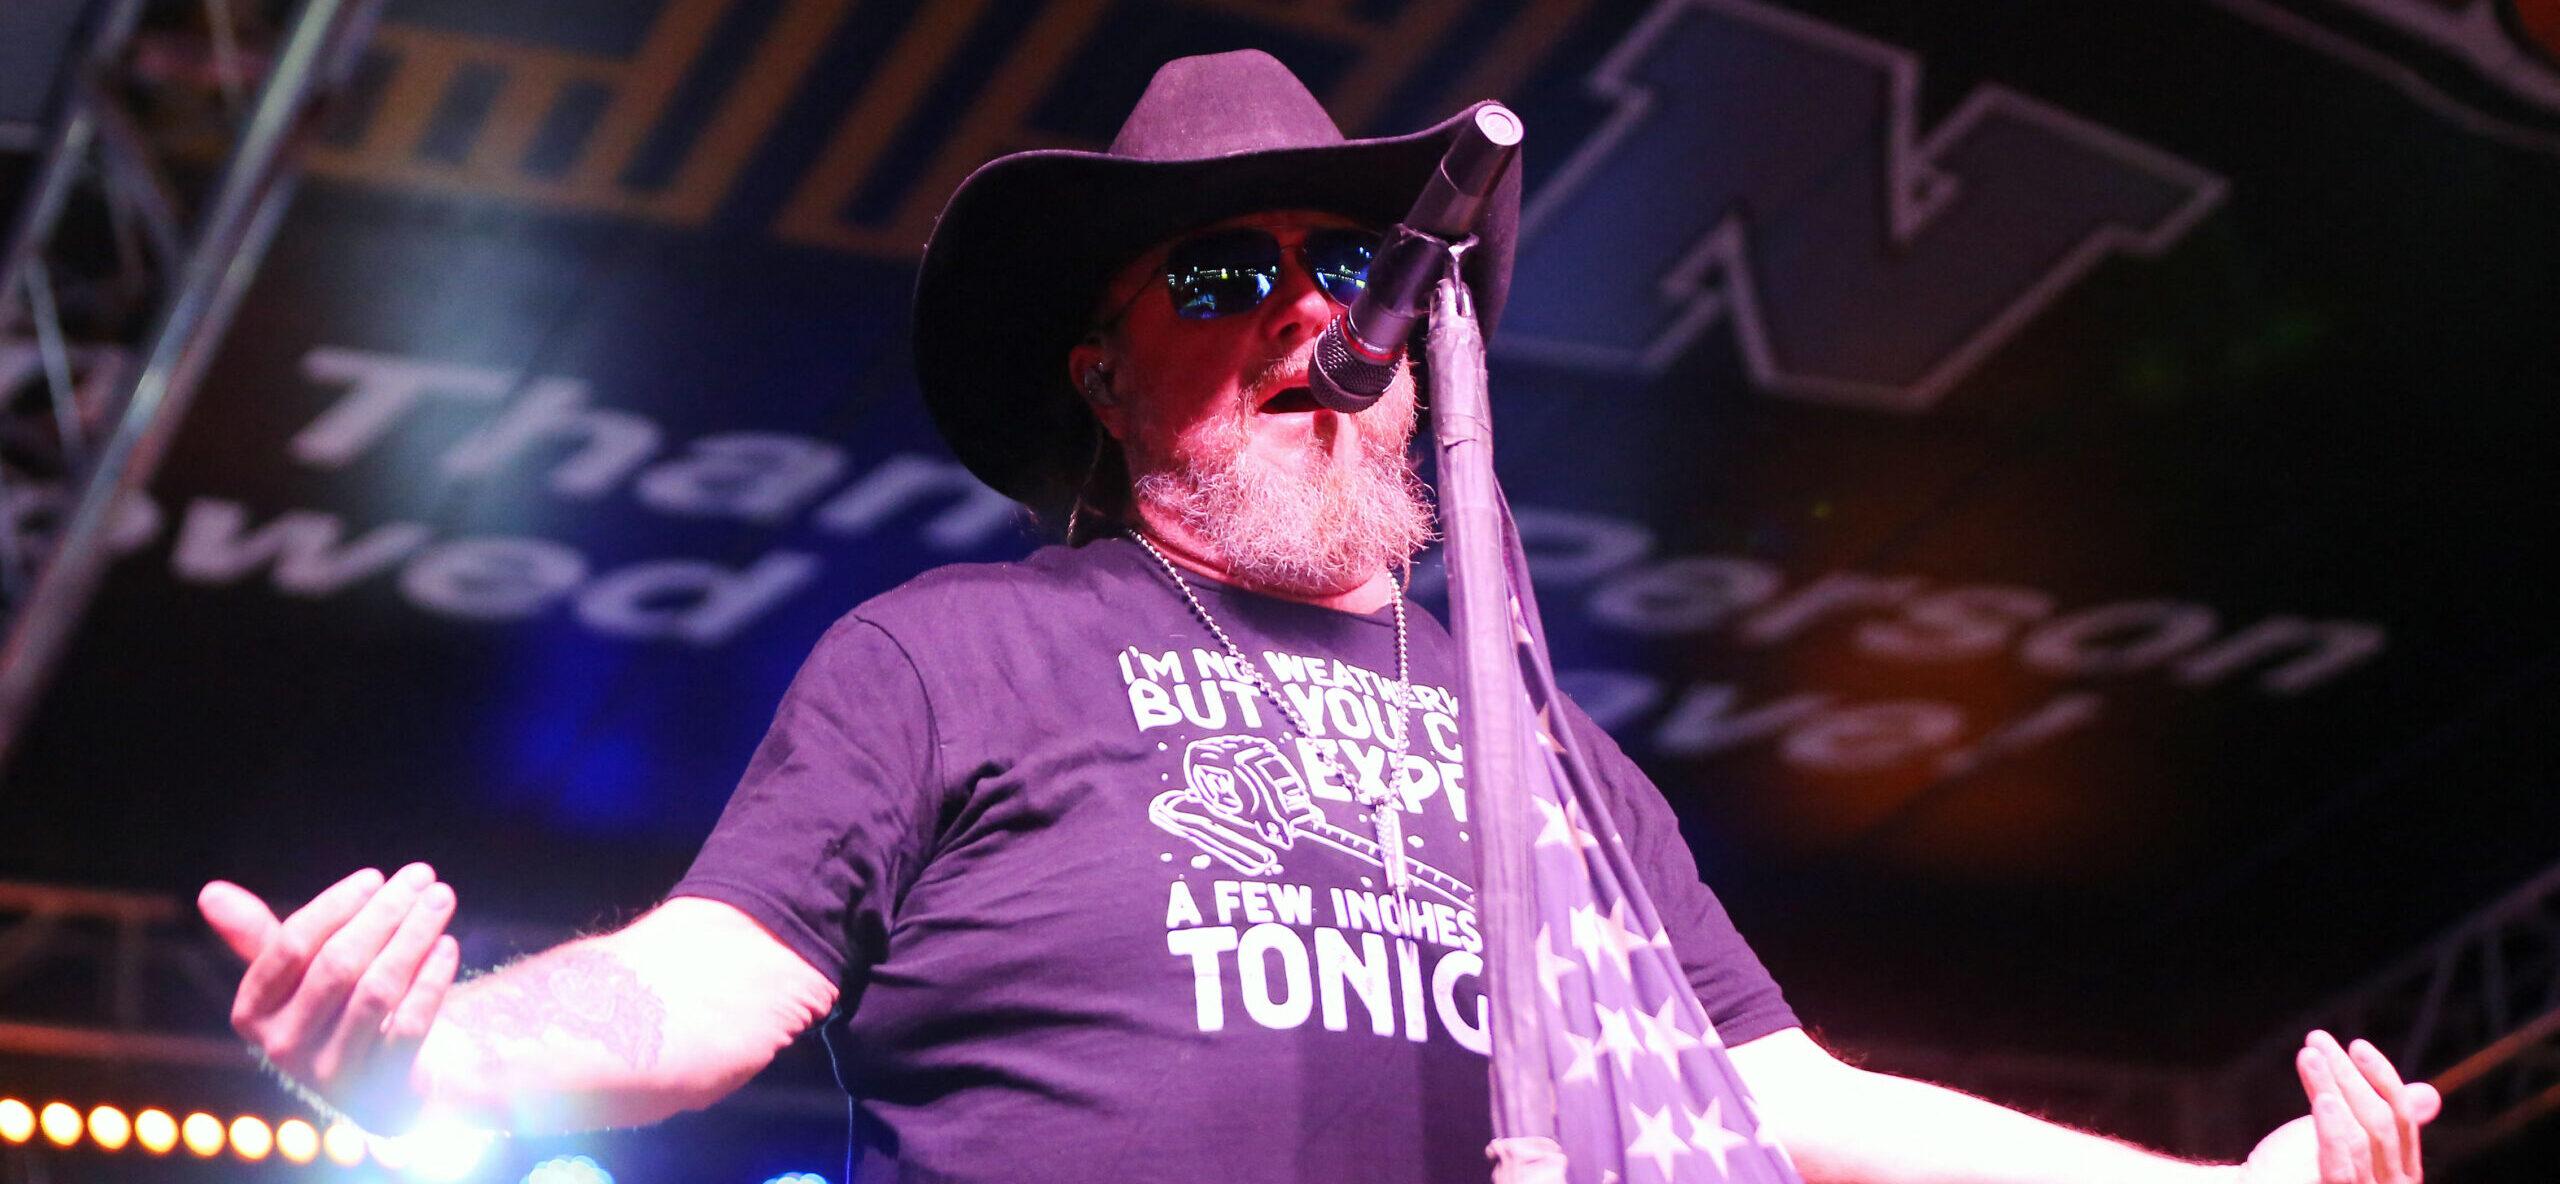 Concertgoer Says Colt Ford ‘Looked Tired’ Moments Before Heart Attack